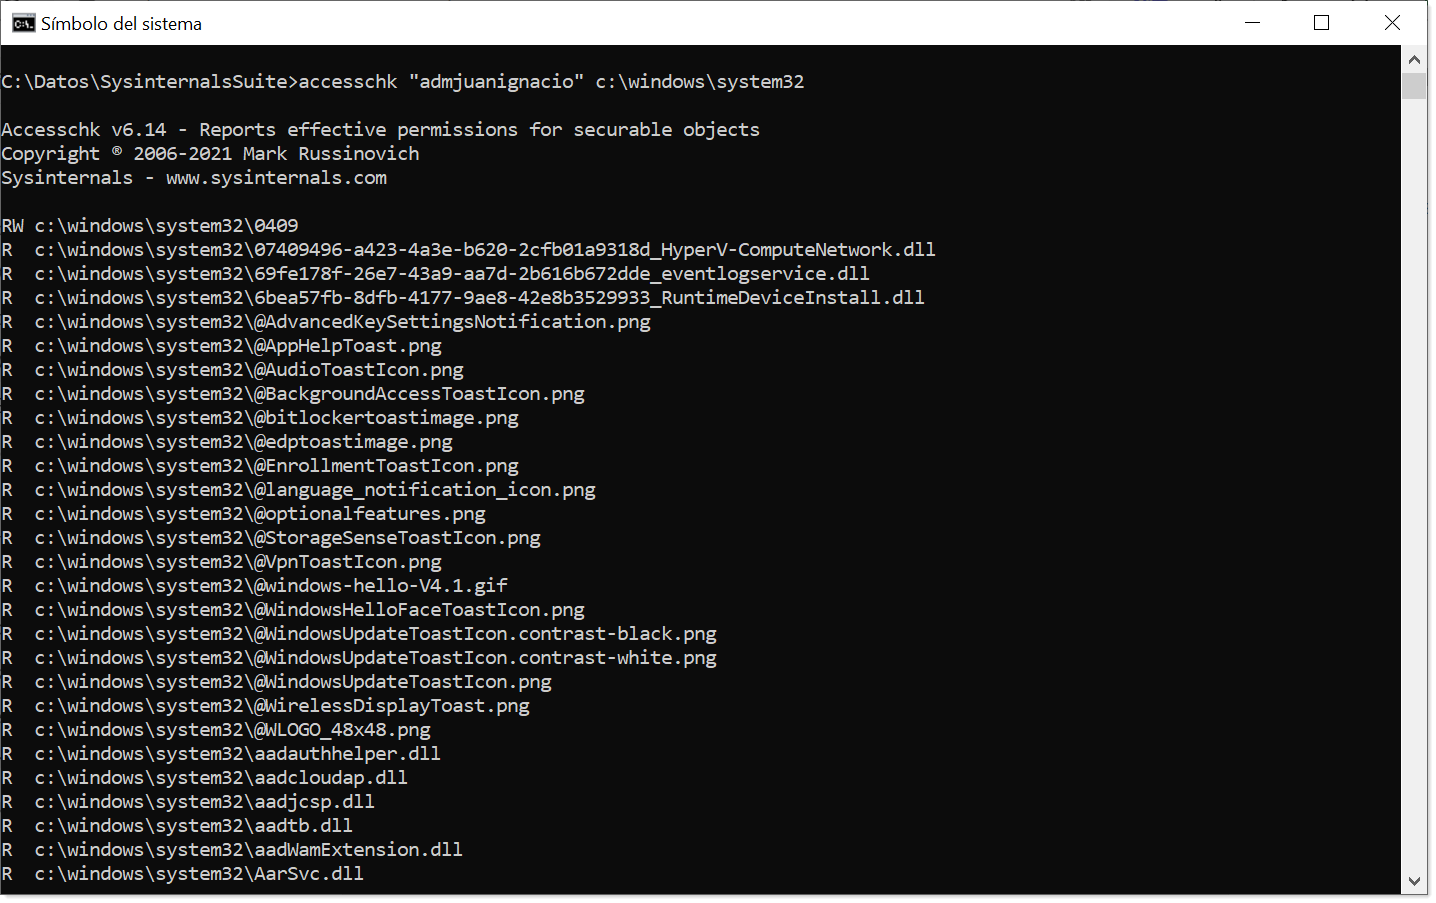 Image: Checking access permissions for a user to “C:\windows\system32” with AccessChk